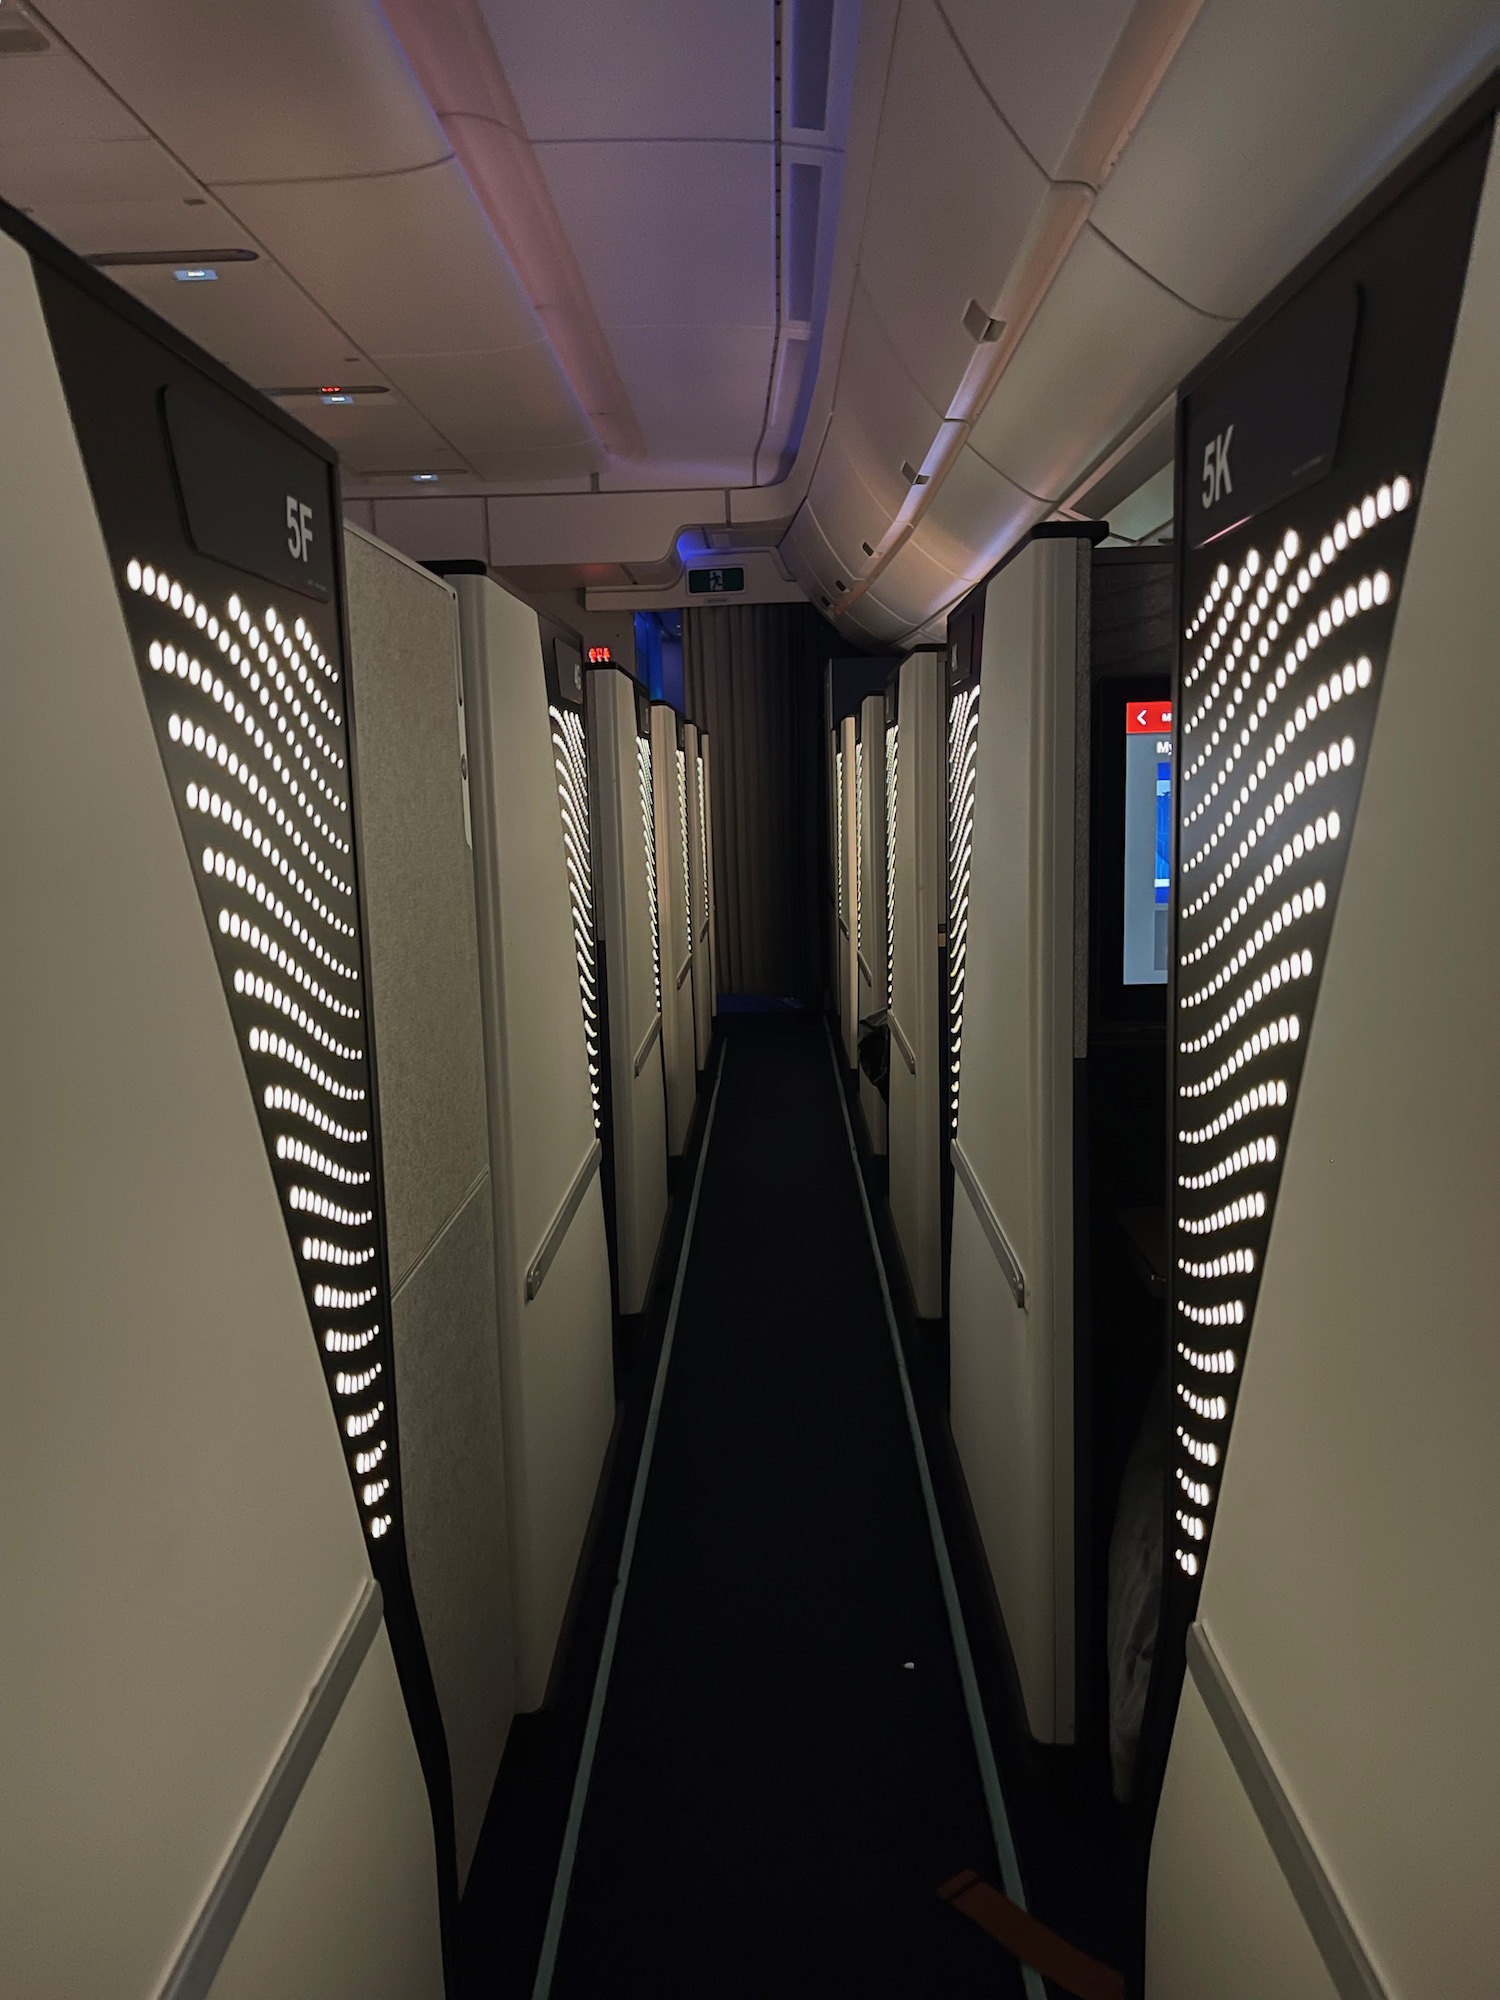 a long hallway with rows of doors